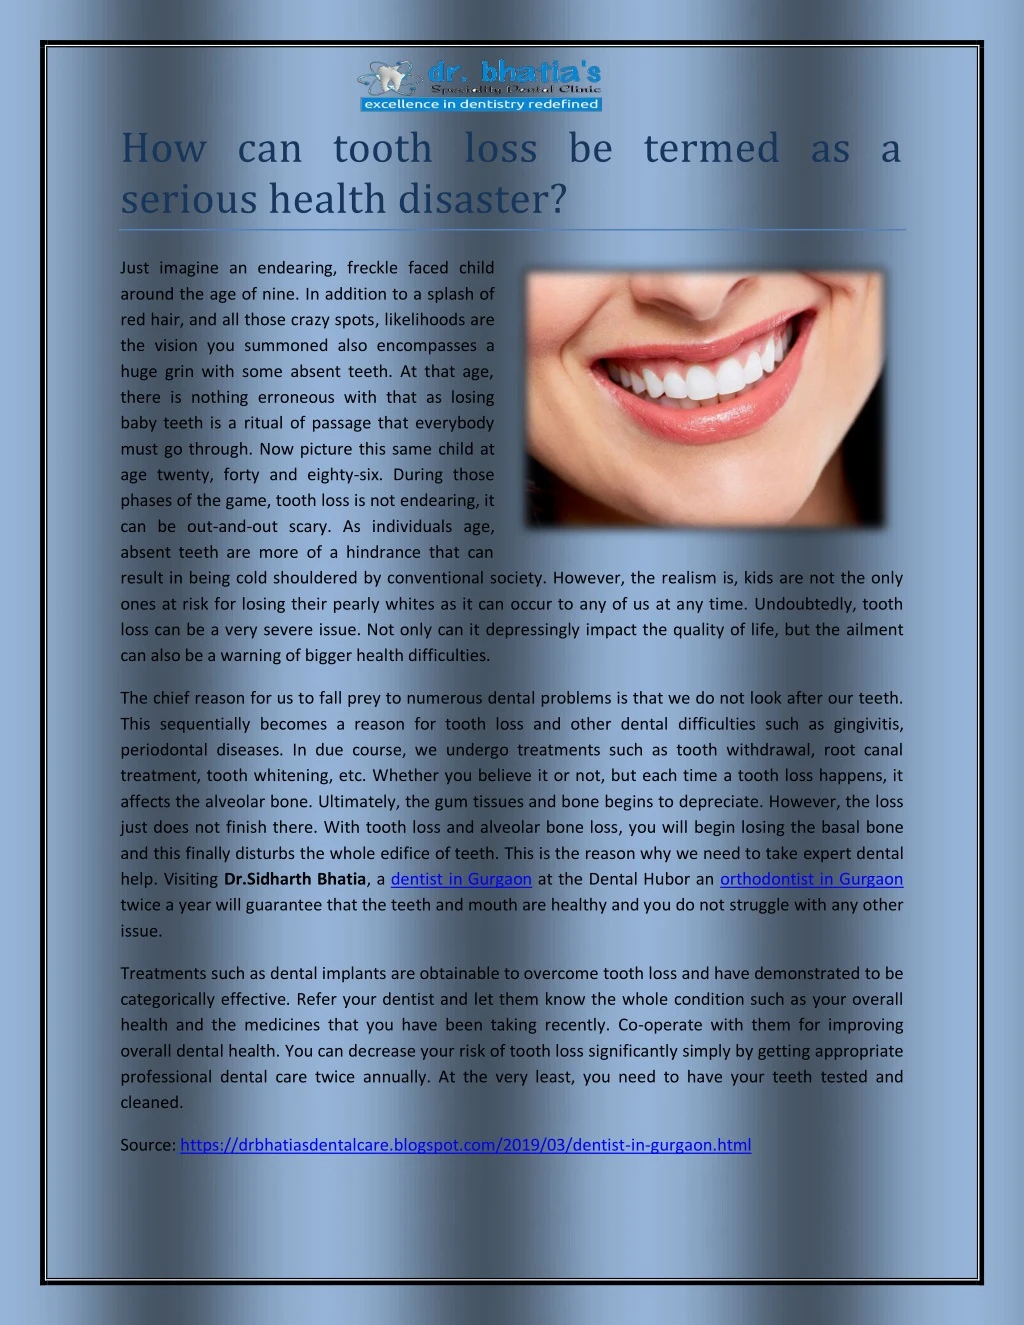 how can tooth loss be termed as a serious health